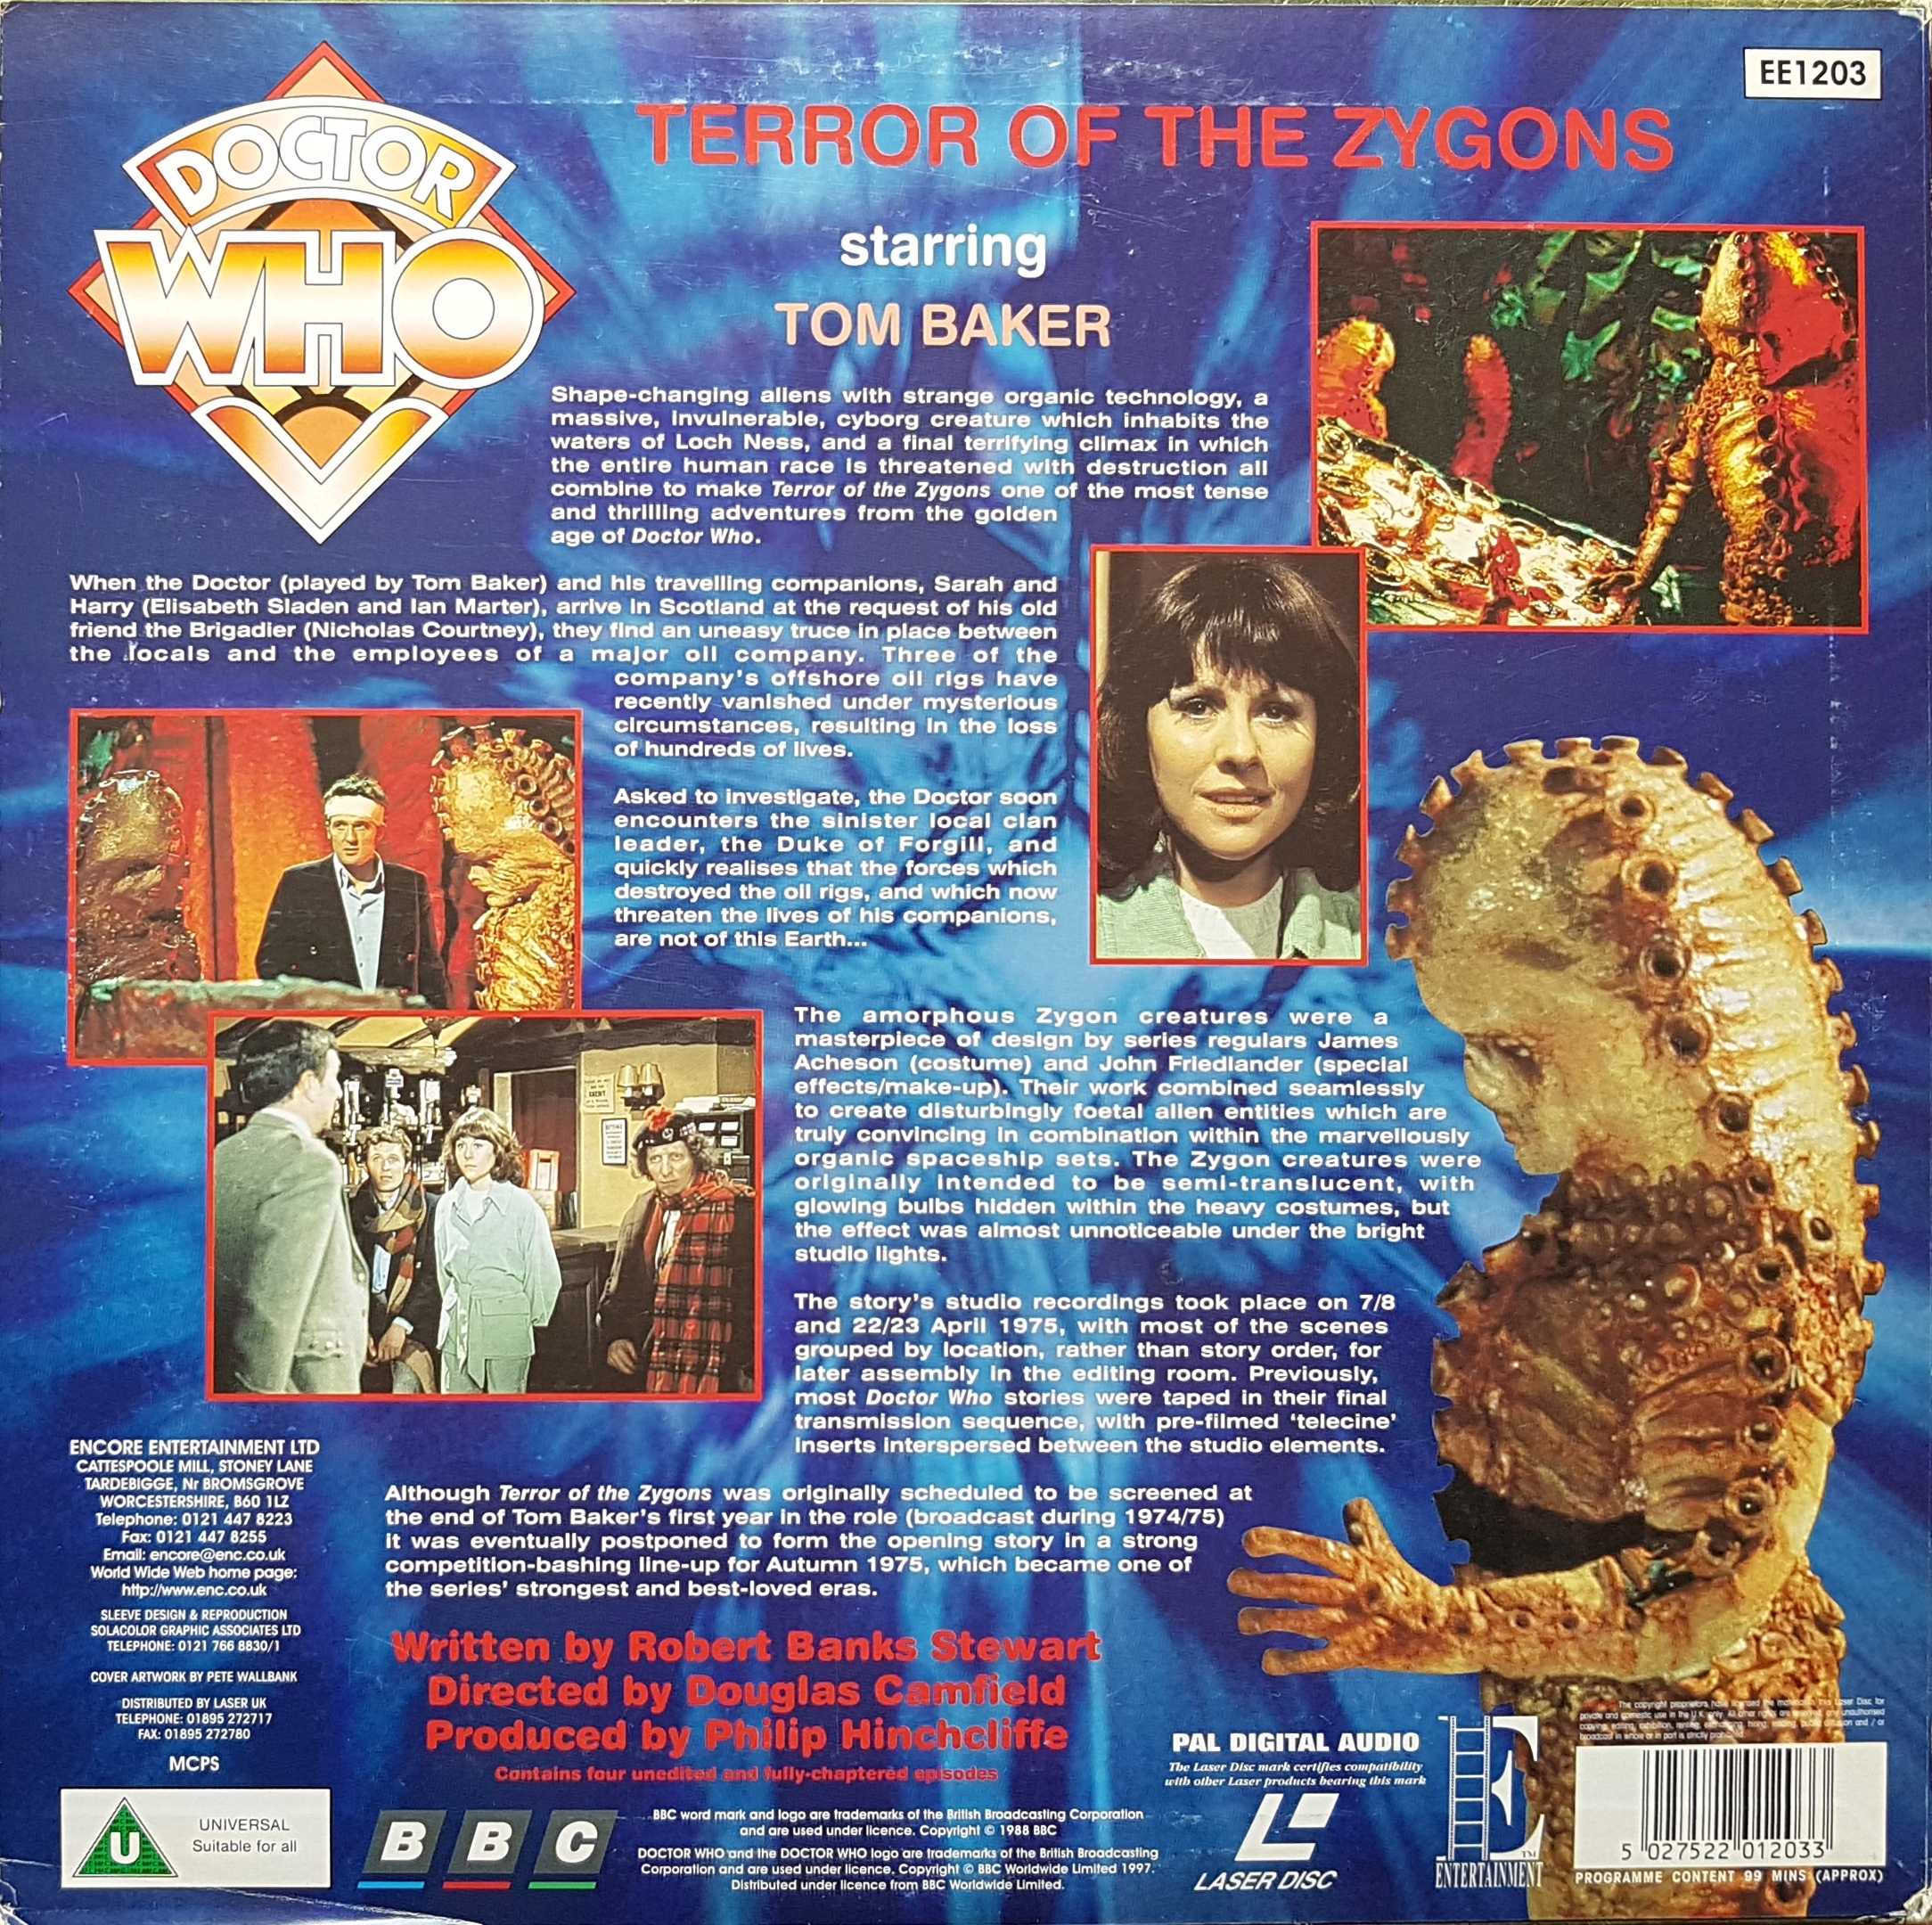 Picture of EE 1203 Doctor Who - Terror of the Zygons by artist Robert Banks Stewart from the BBC records and Tapes library